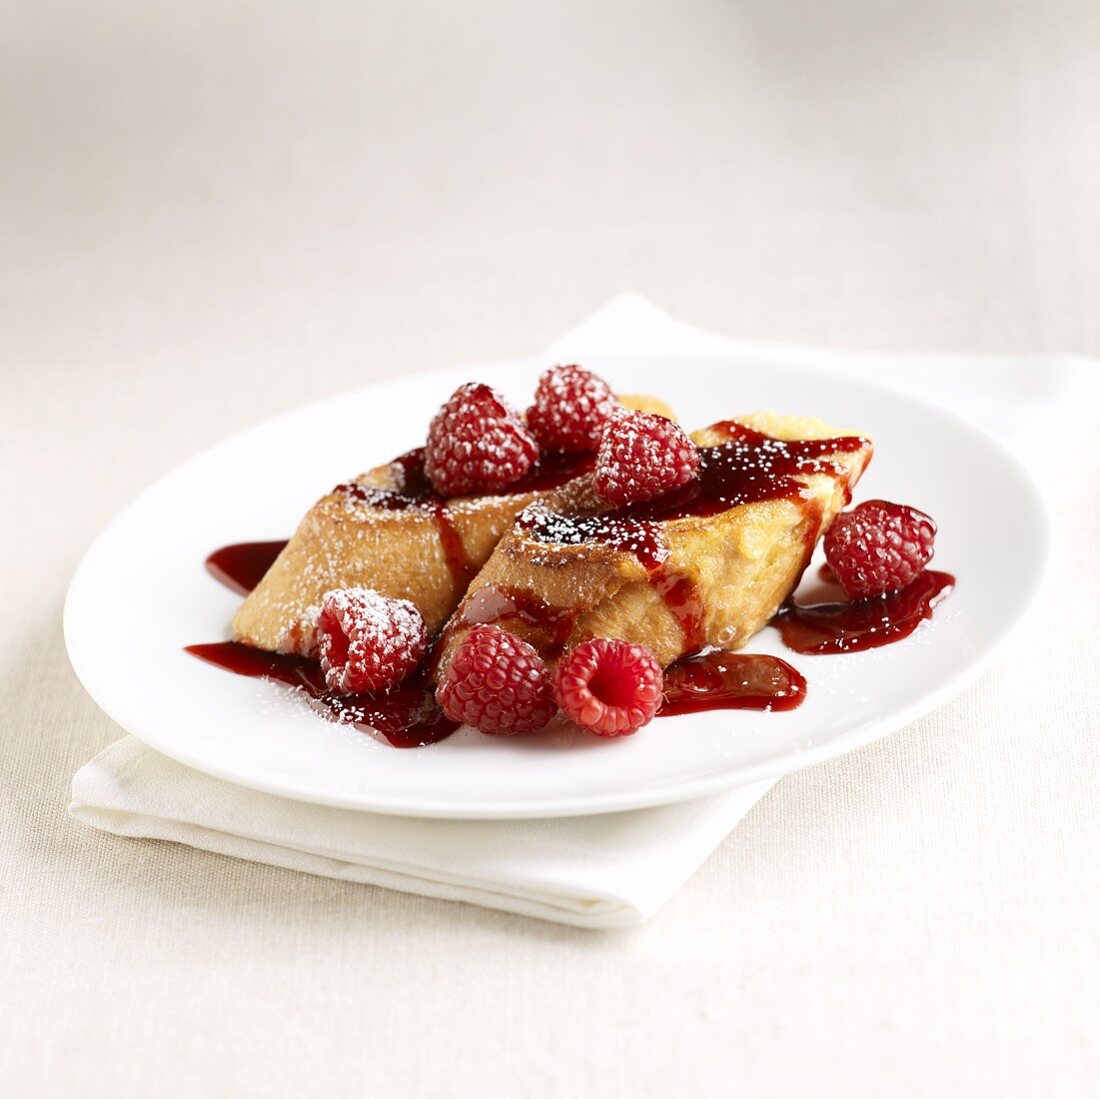 French Toast Topped with Raspberry Sauce and Raspberries